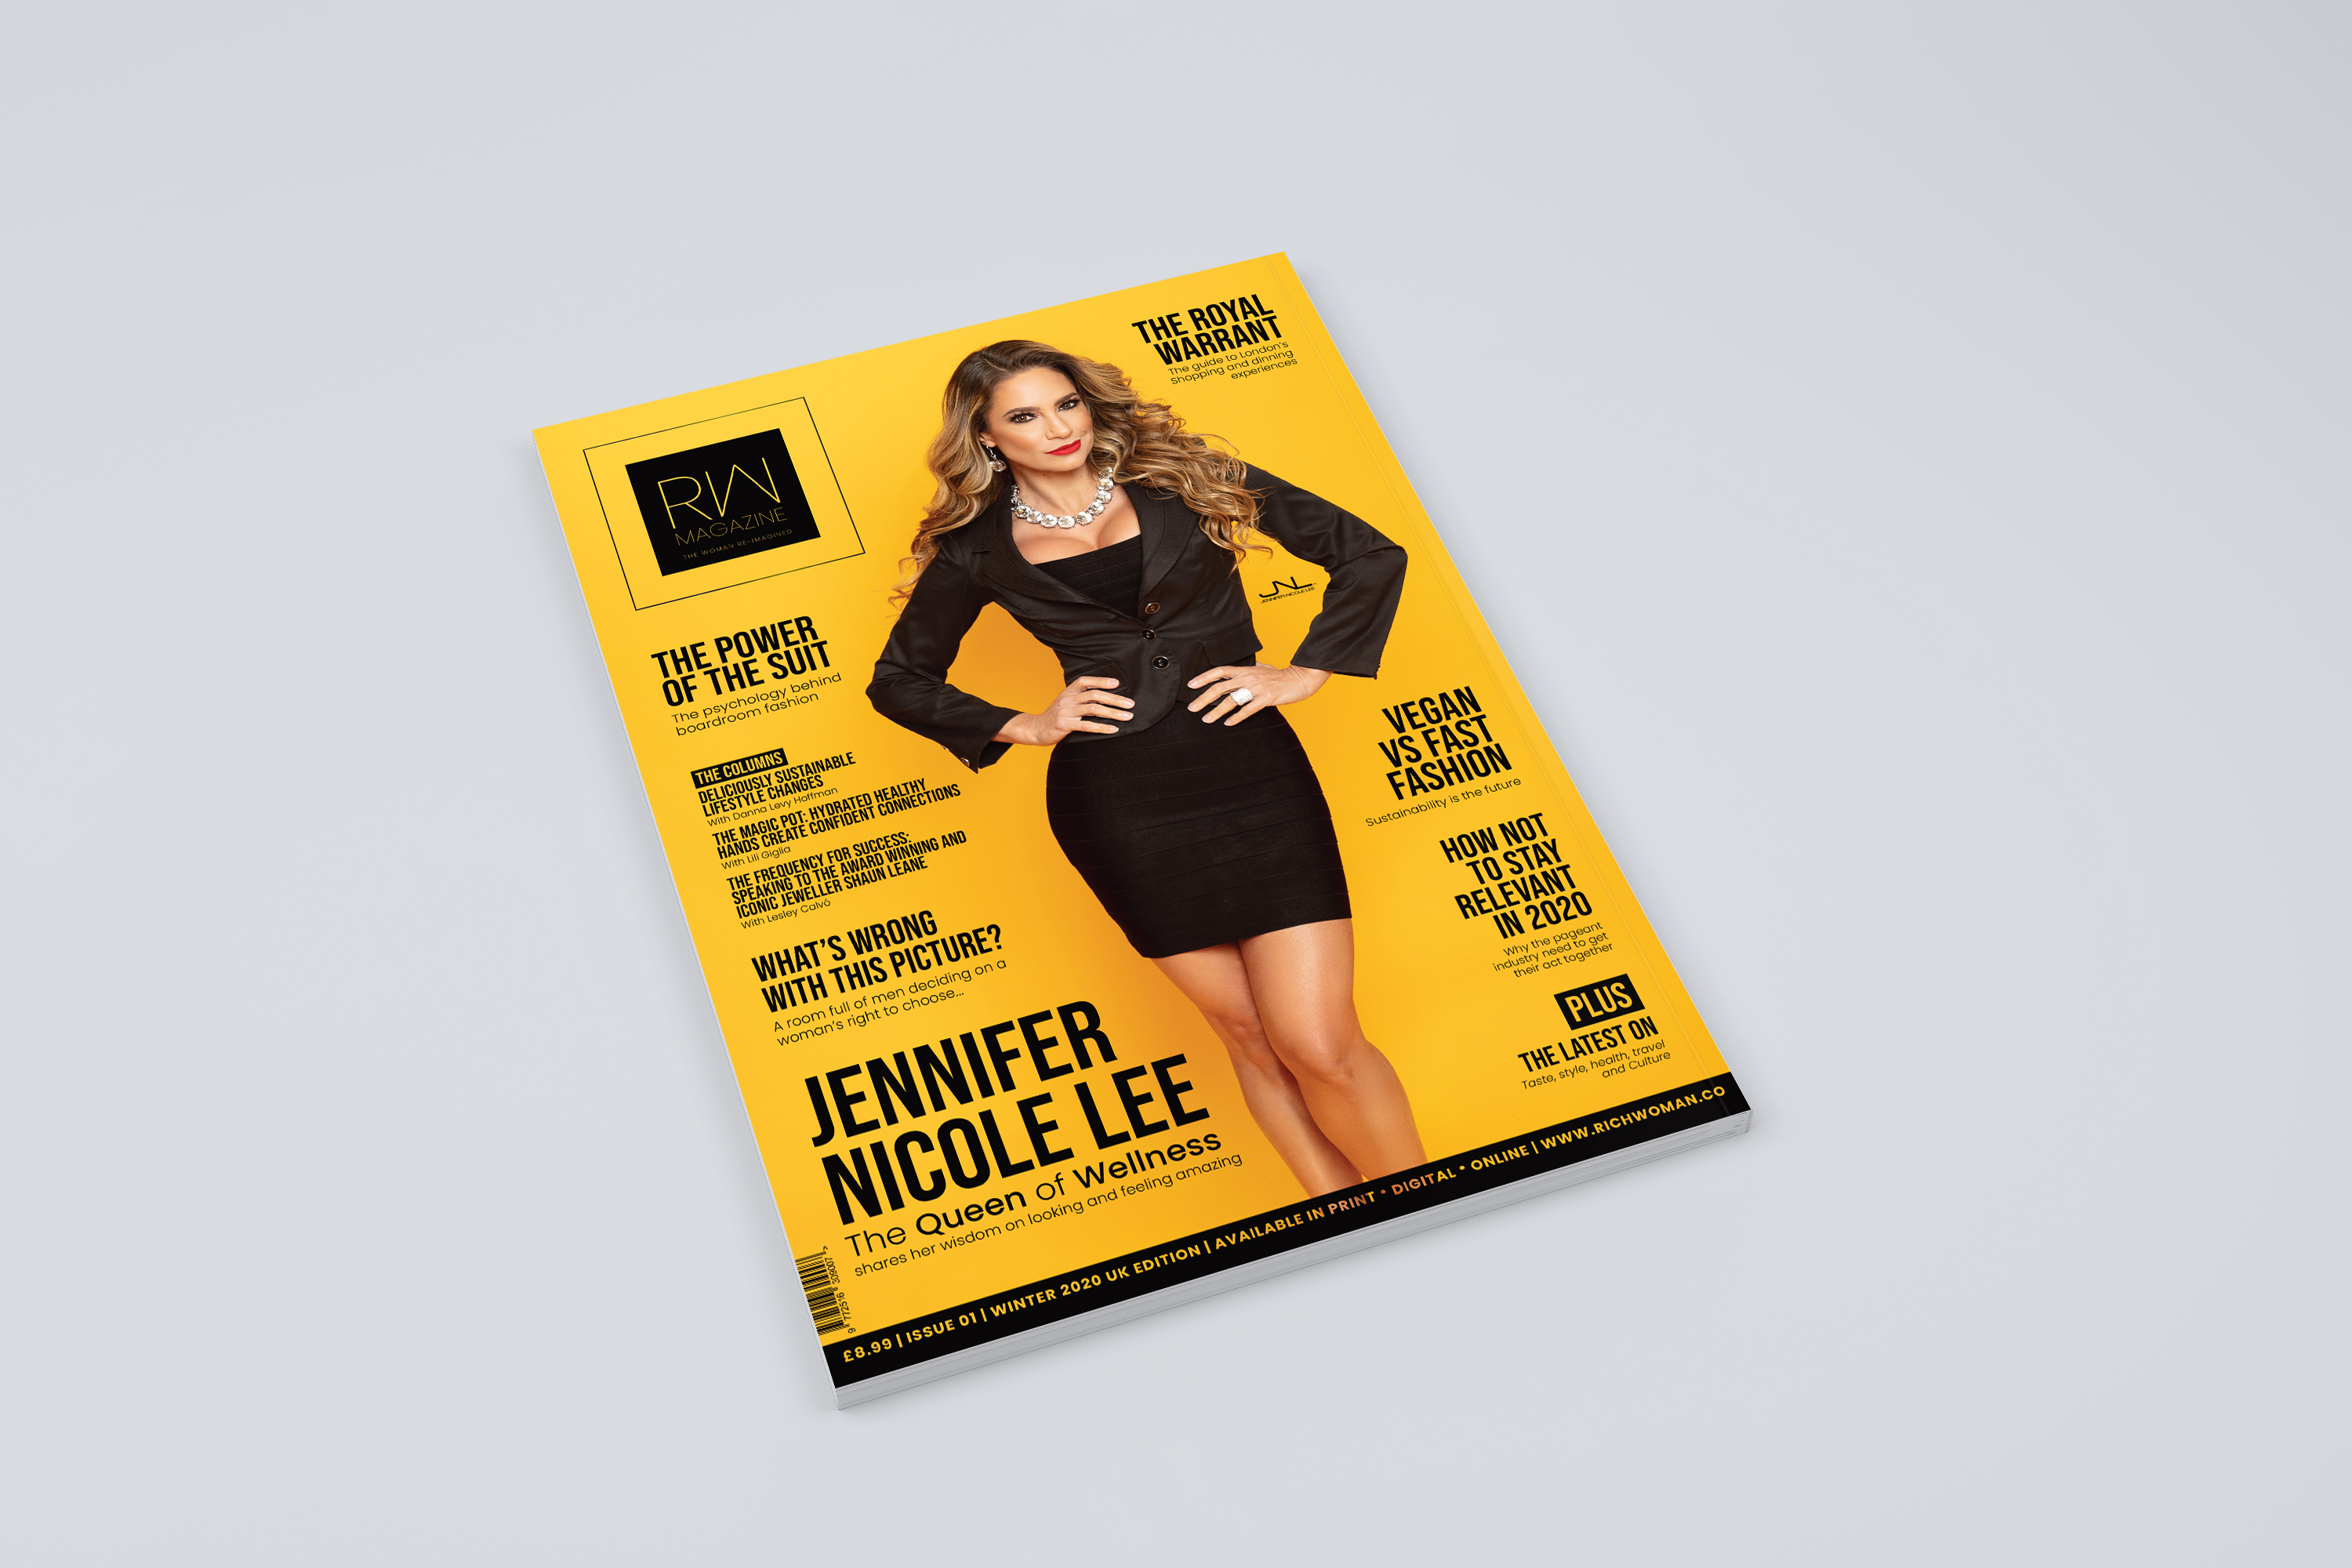 MTN Press Limited is excited to announce the launch of its new British Luxury Lifestyle magazine, Rich Woman in January 2020!